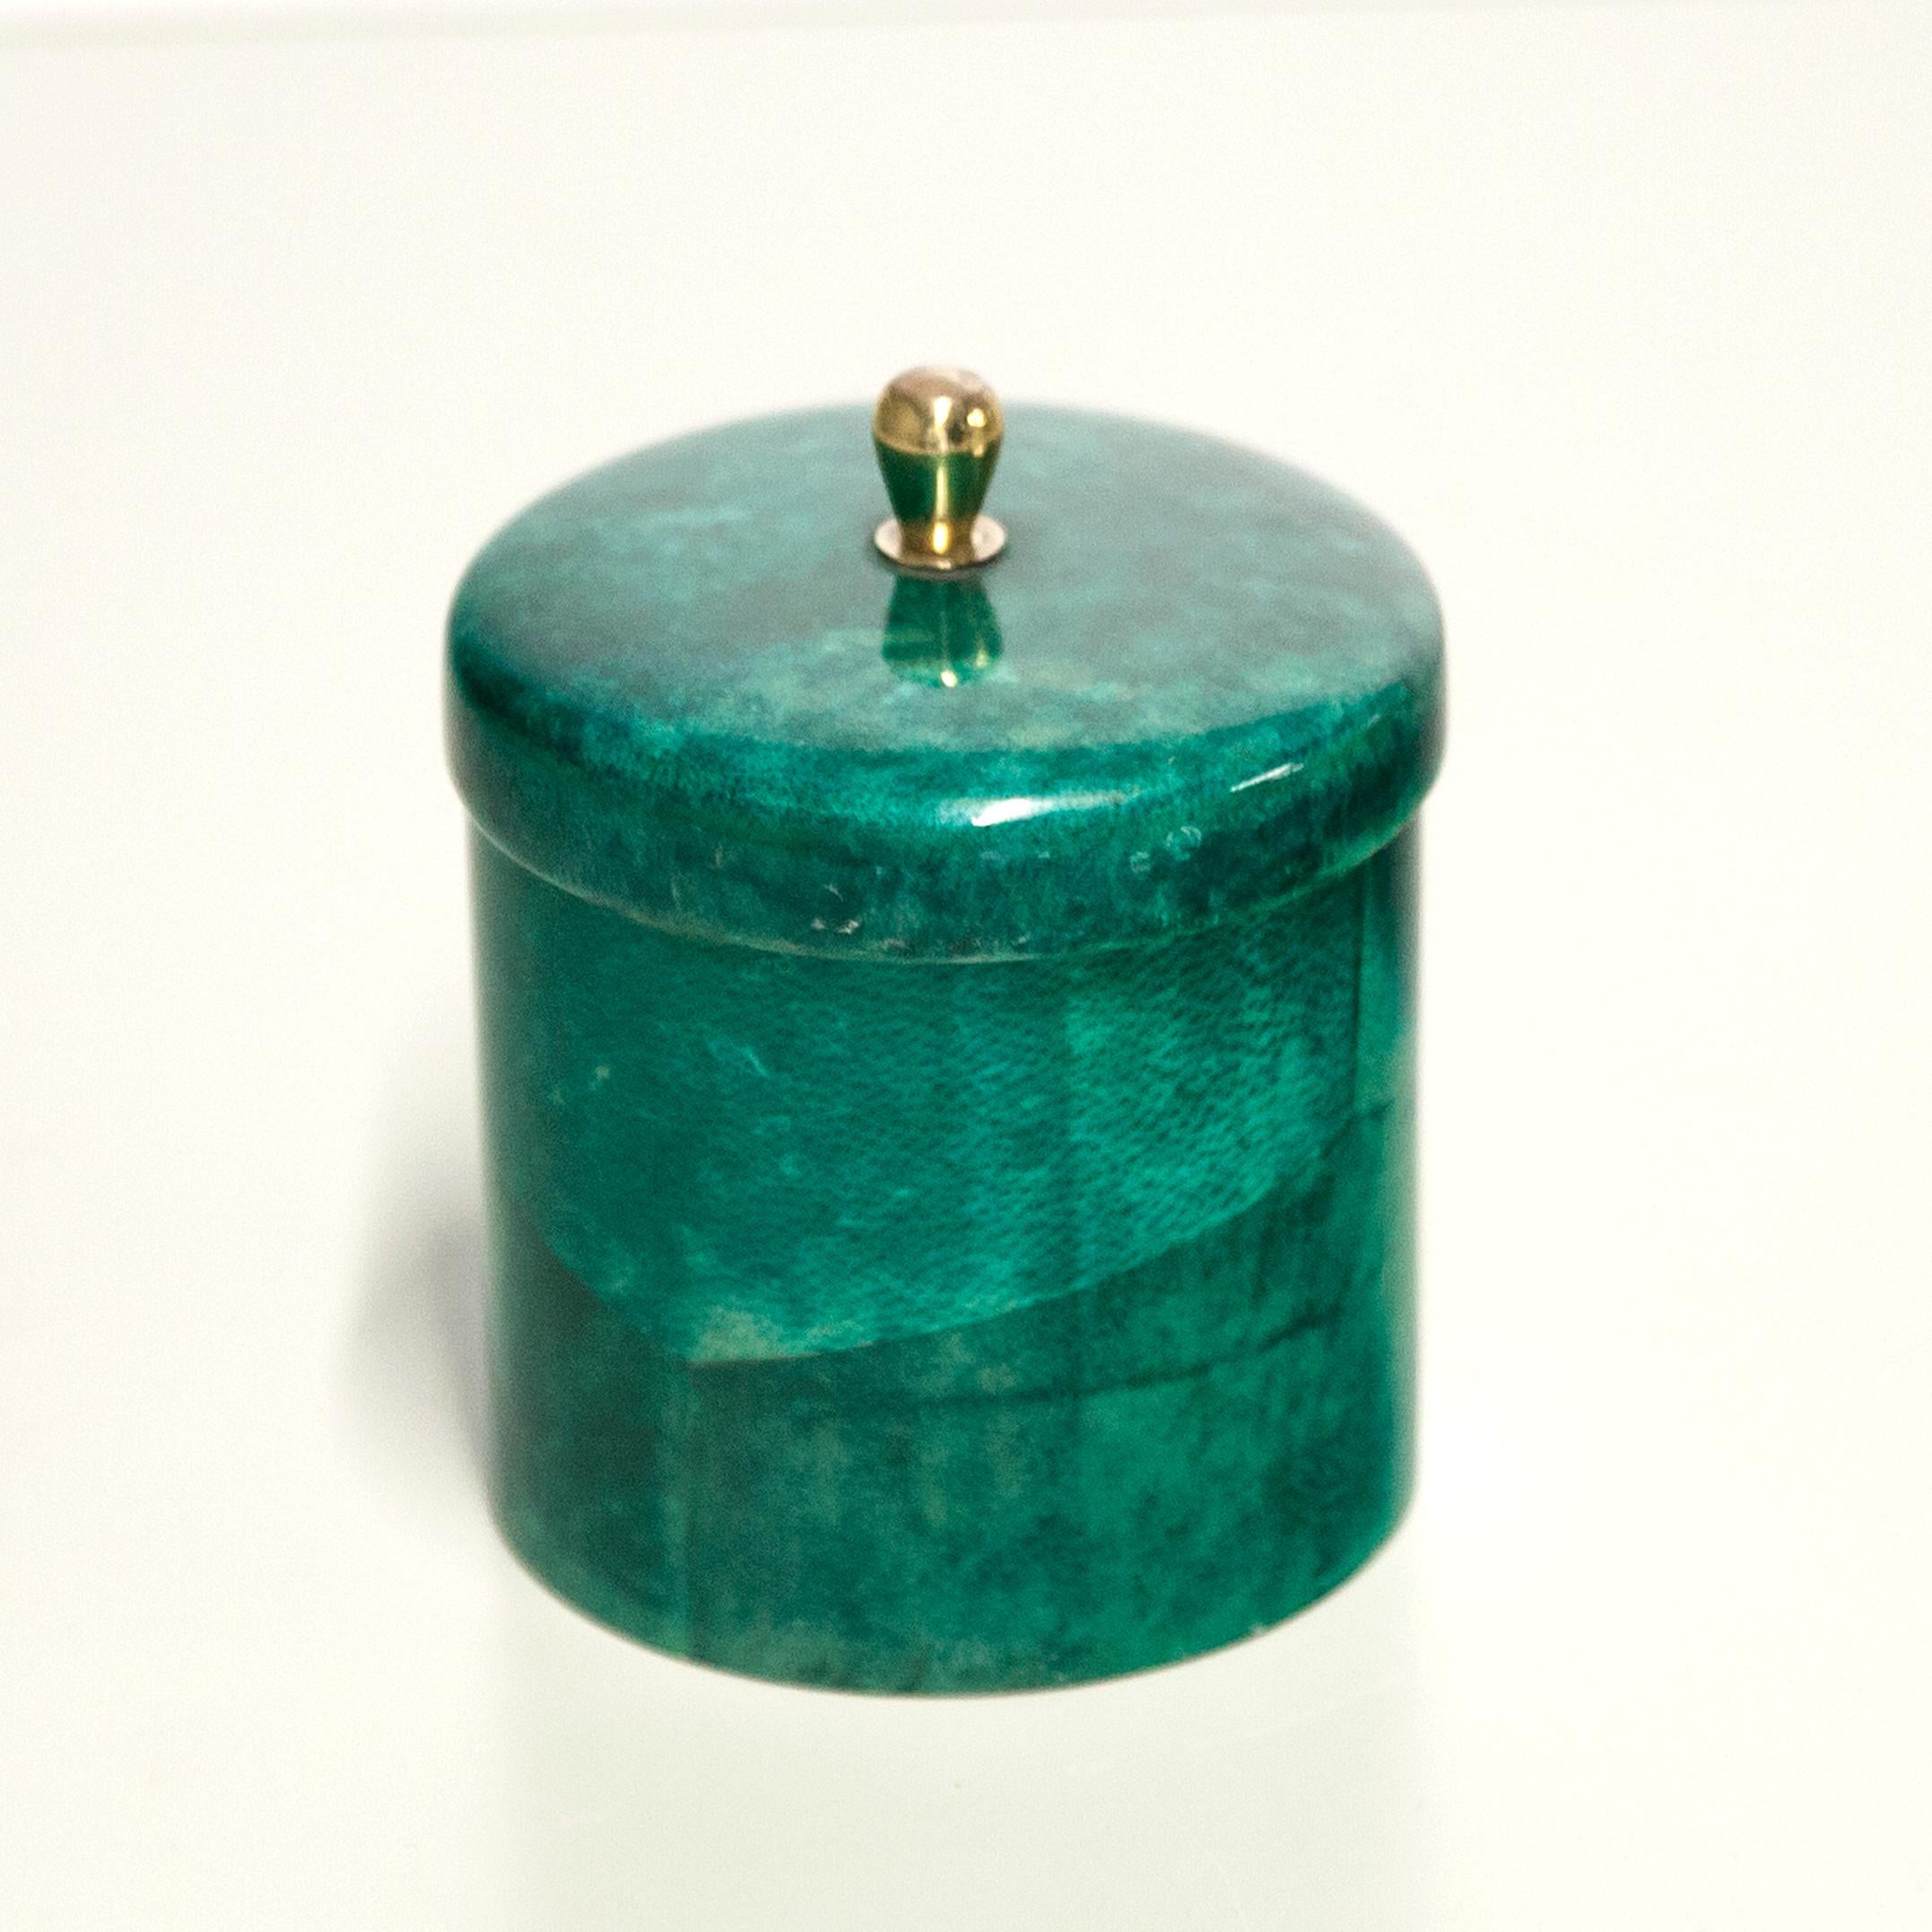 Elegant small box in green goatskin with a brass nope and walnut inlay inside, made by Aldo Tura in the 1970s. Excellent vintage condition.